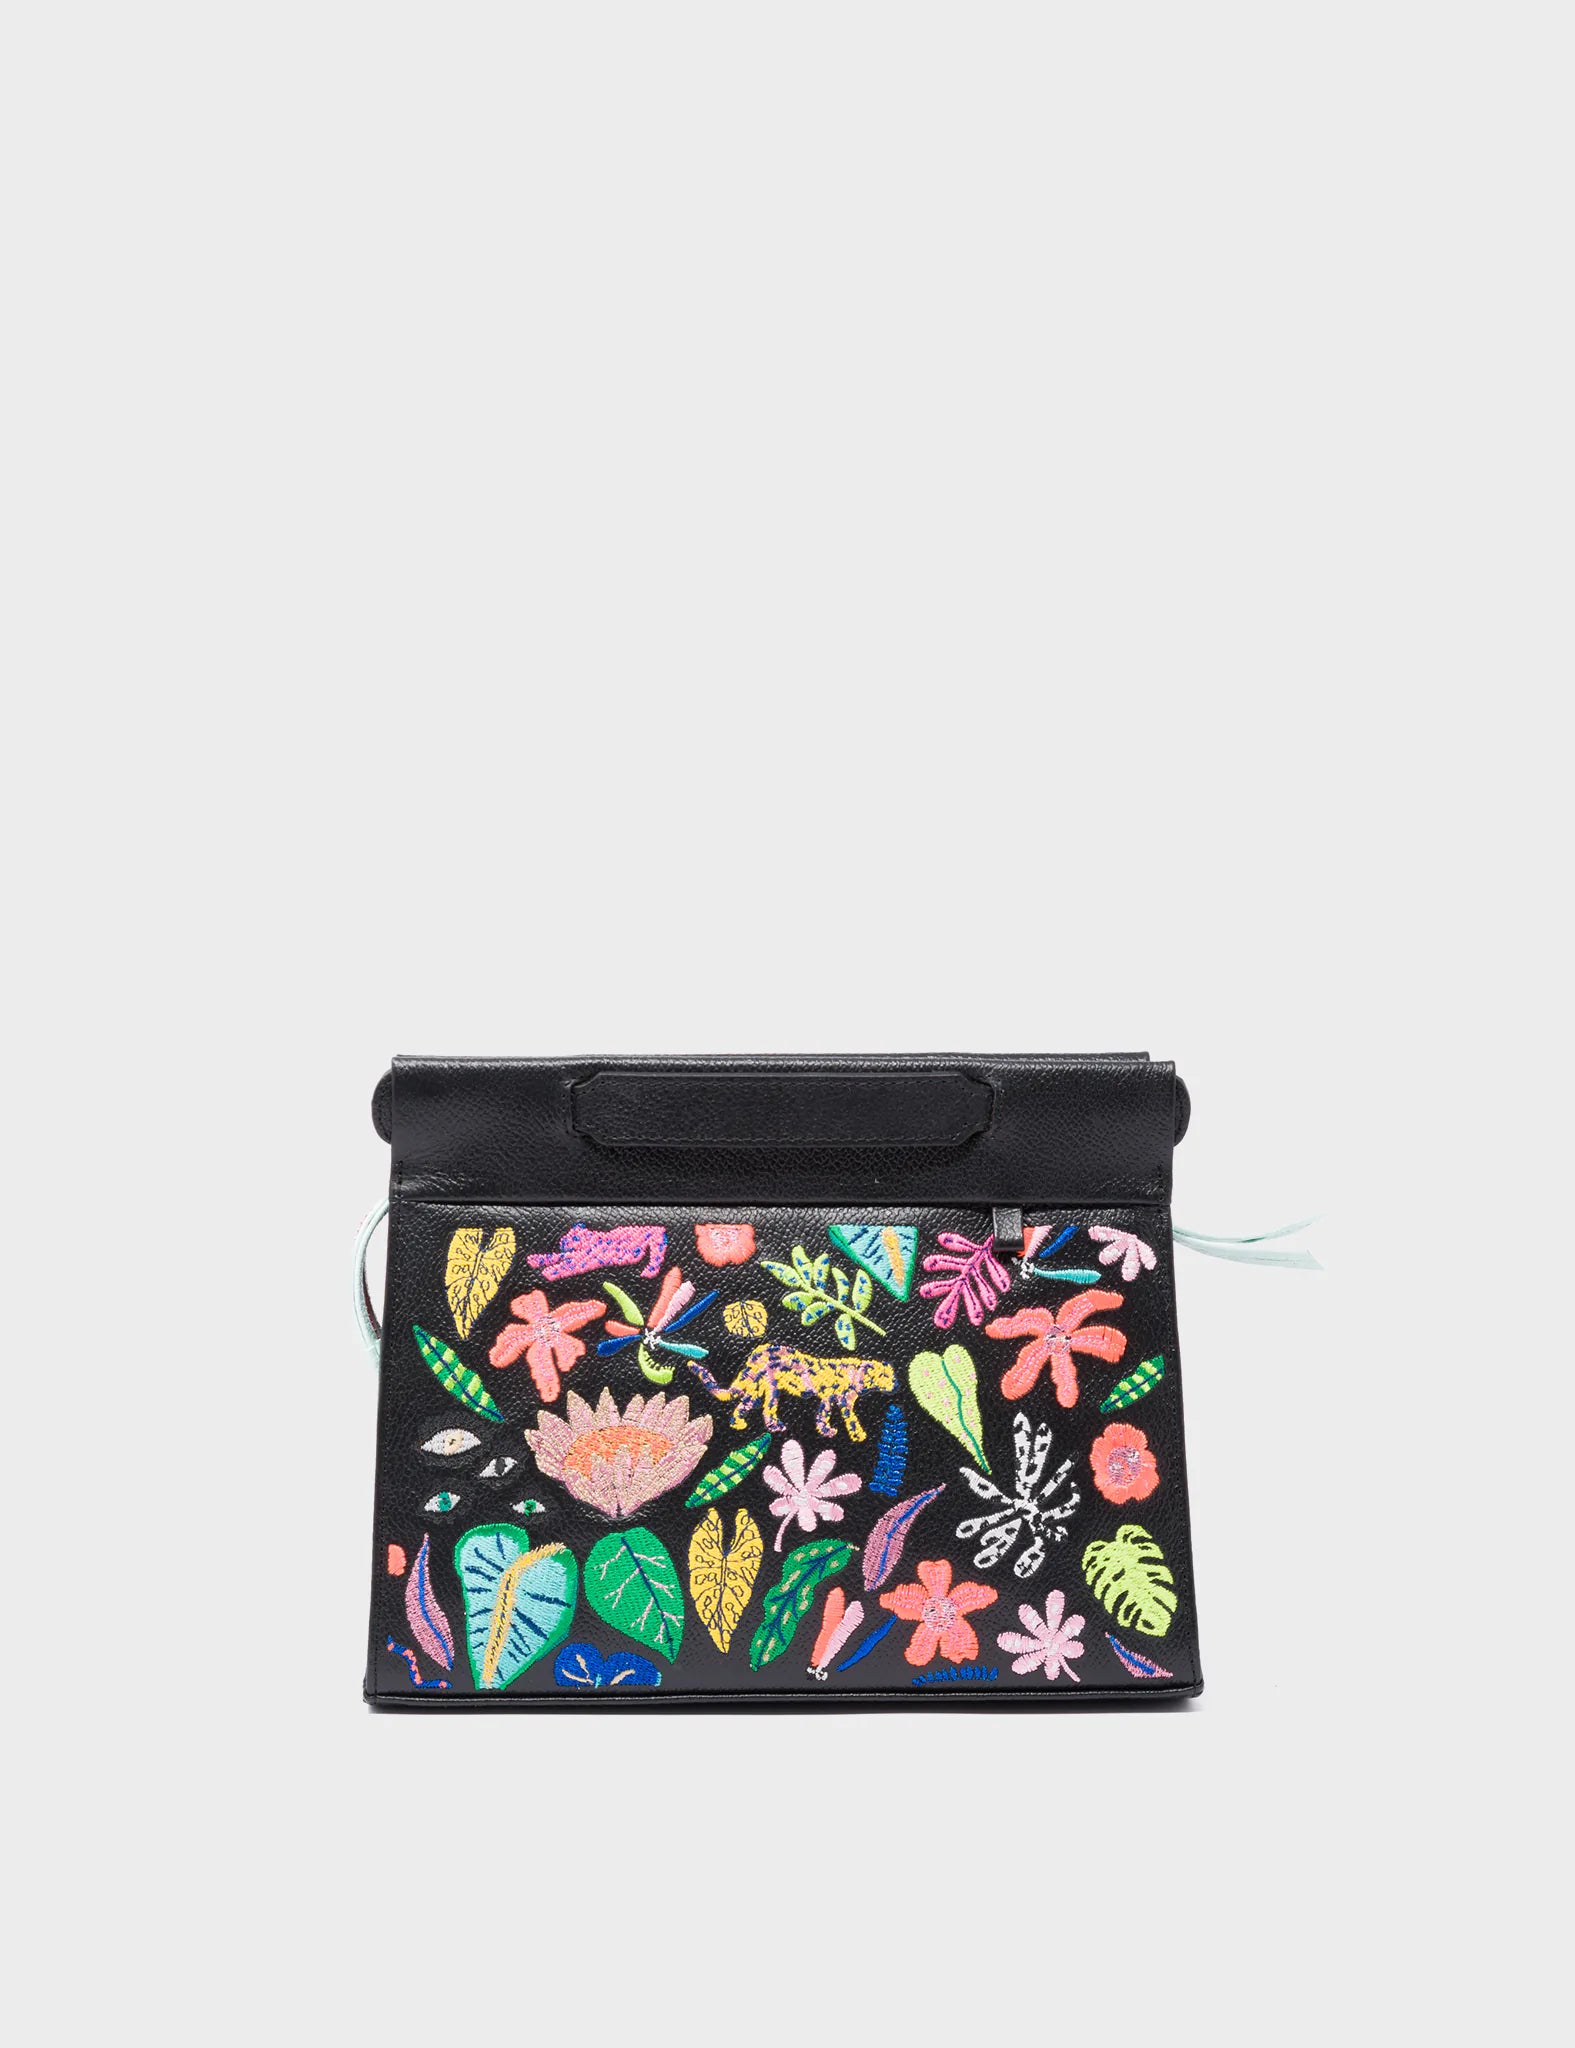 Vali Crossbody Small Black Leather Bag - El Tropico Print and Embroidery Design - Front